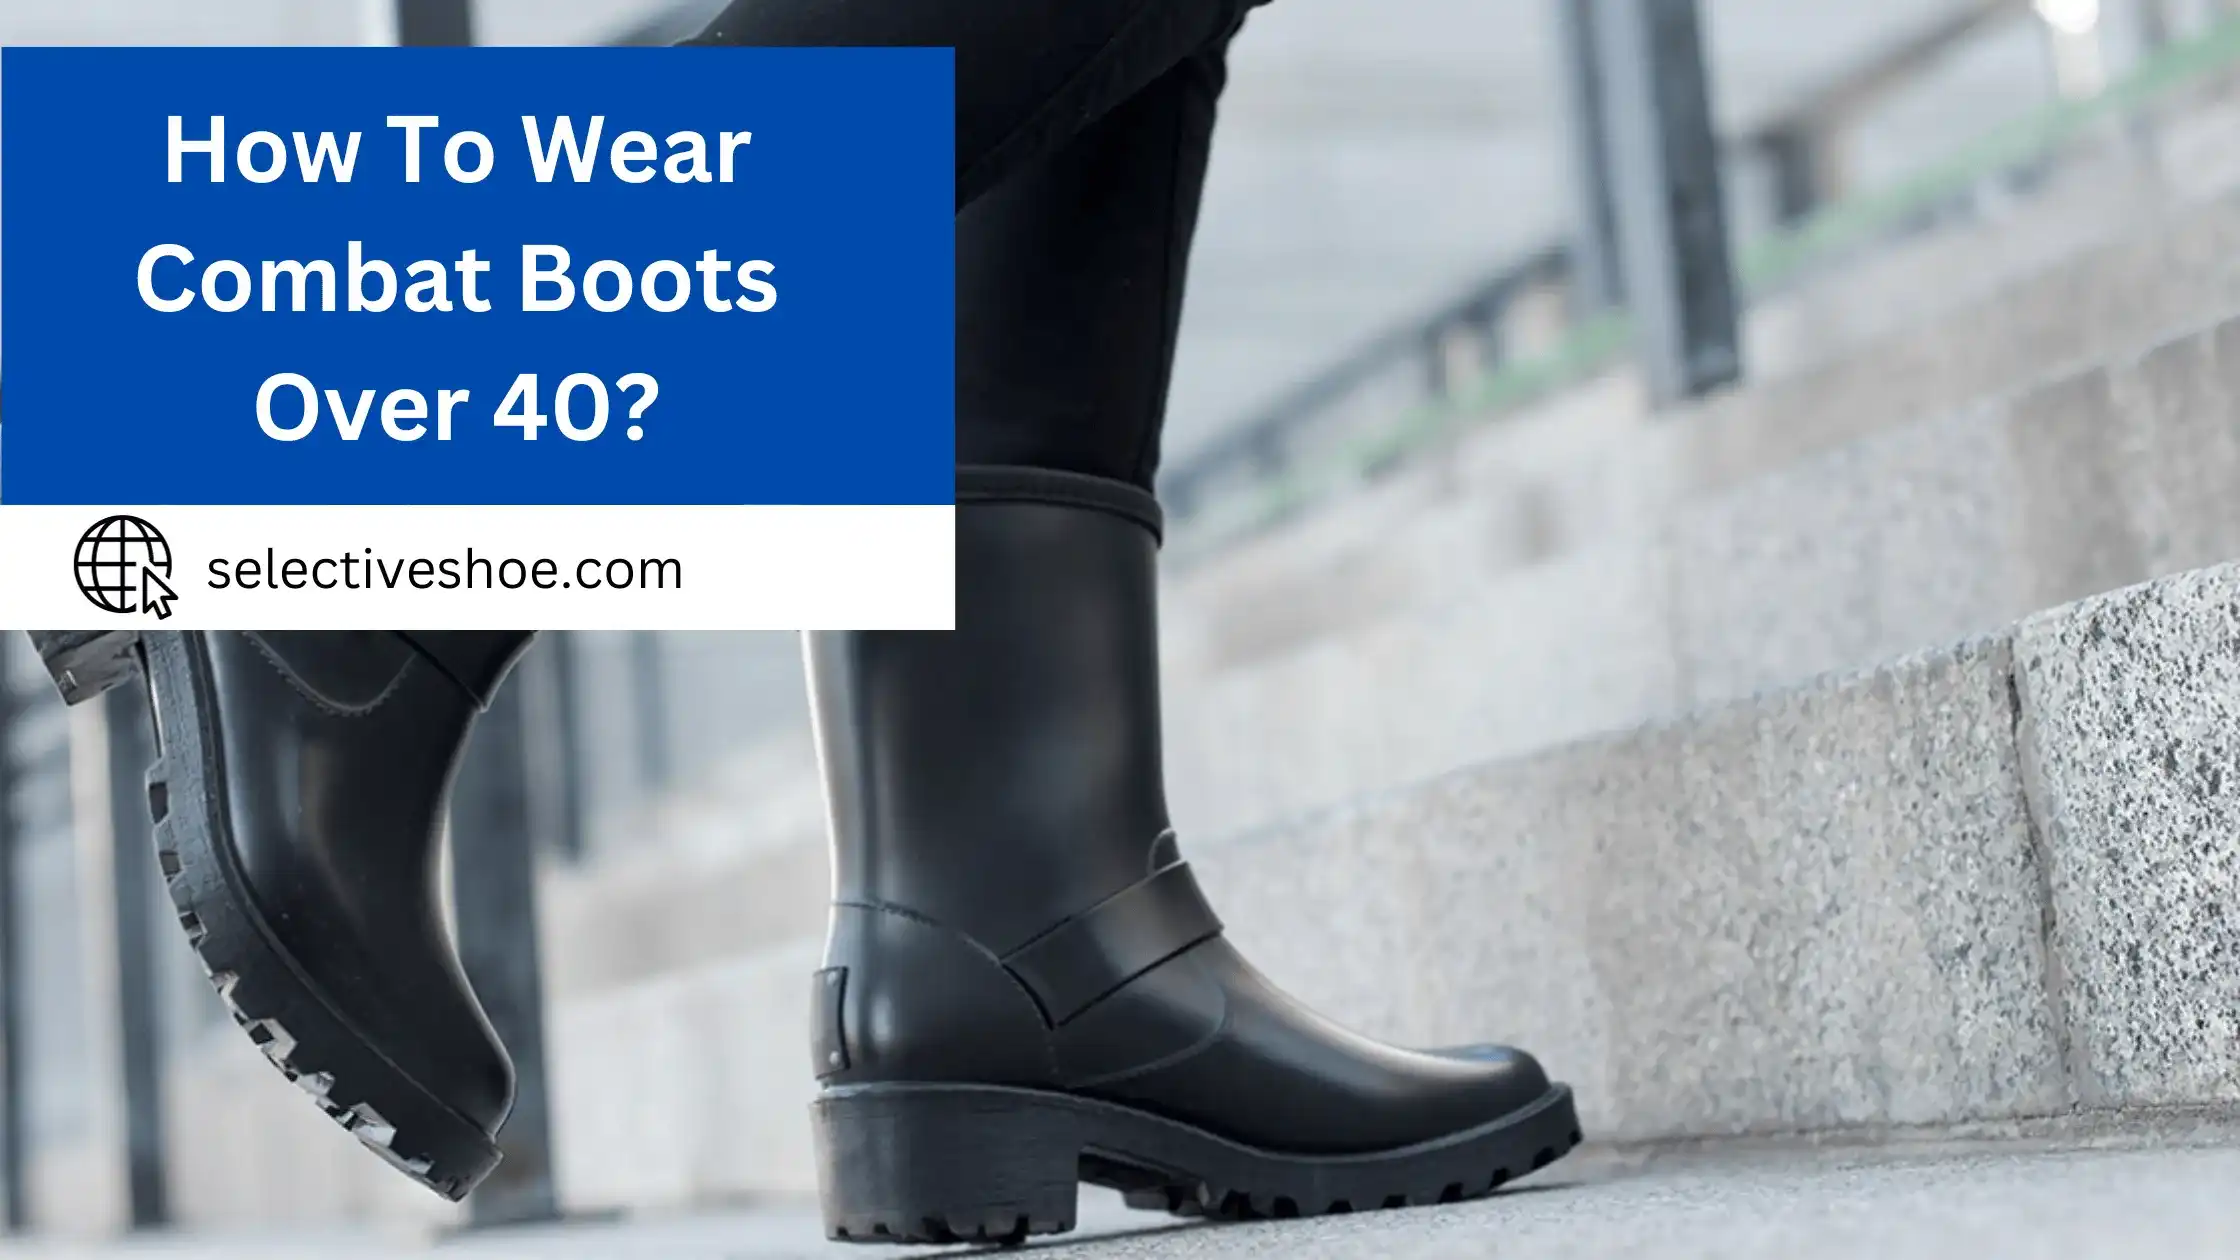 How To Wear Combat Boots Over 40? Footwear Guide